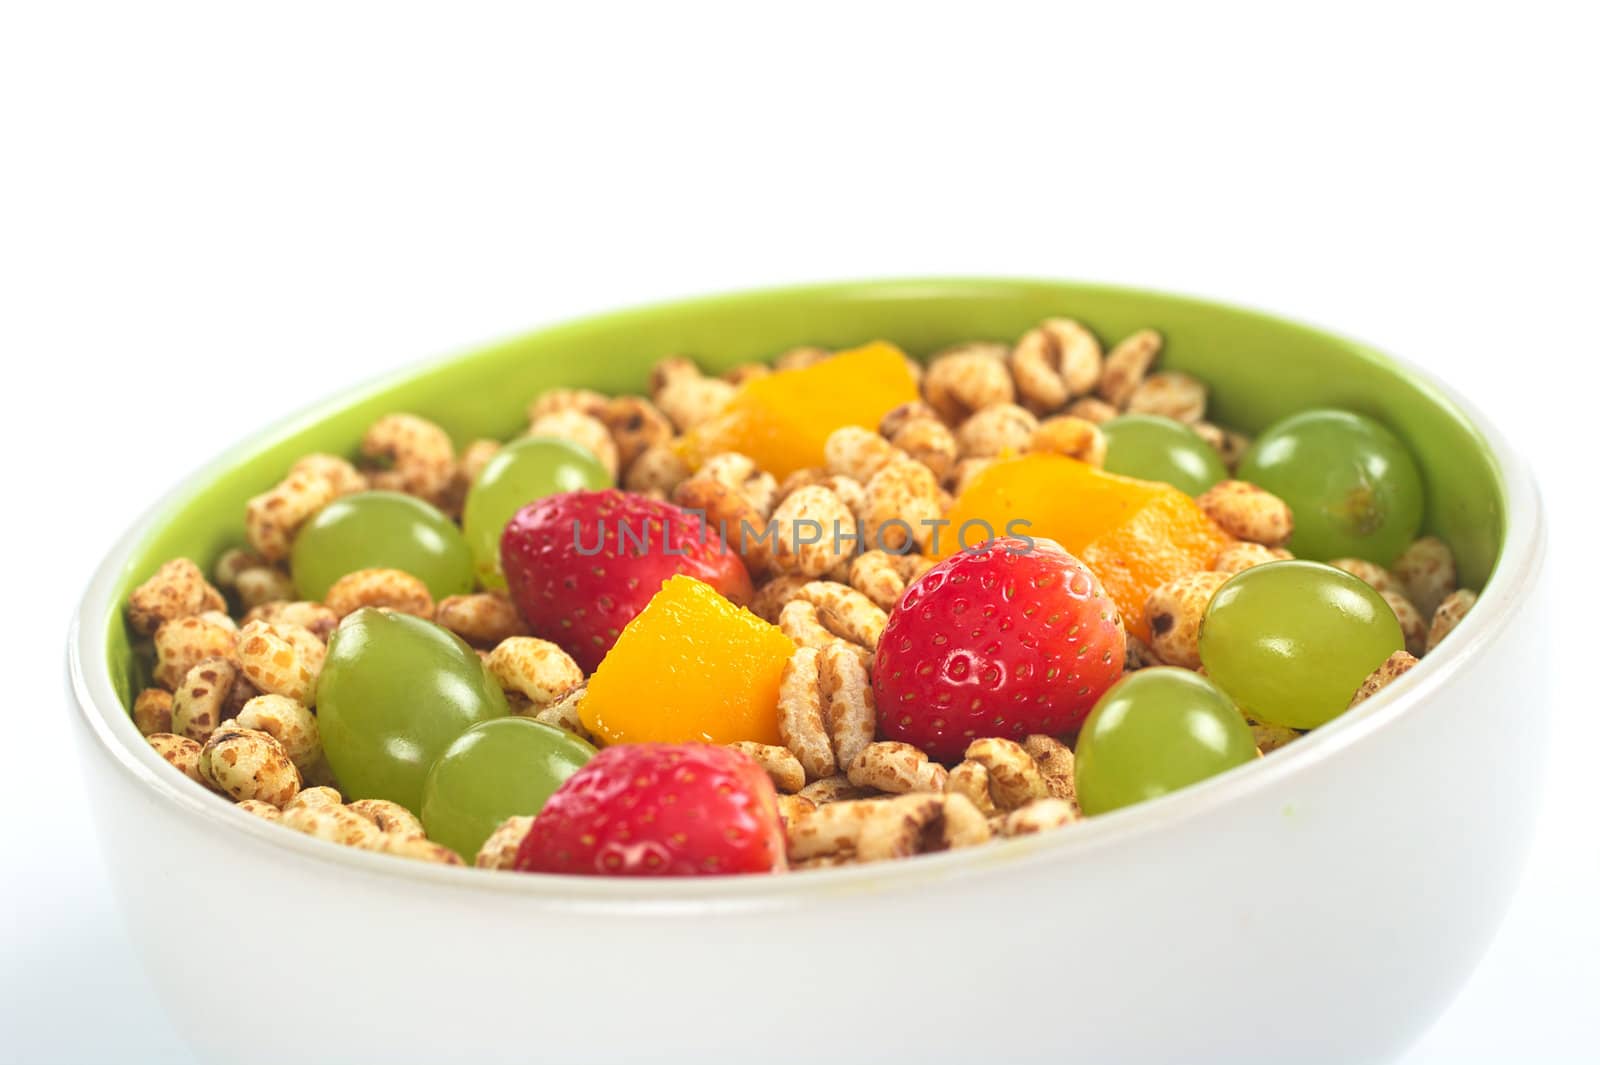 Fruit Salad with Puffed Wheat Cereal by ildi